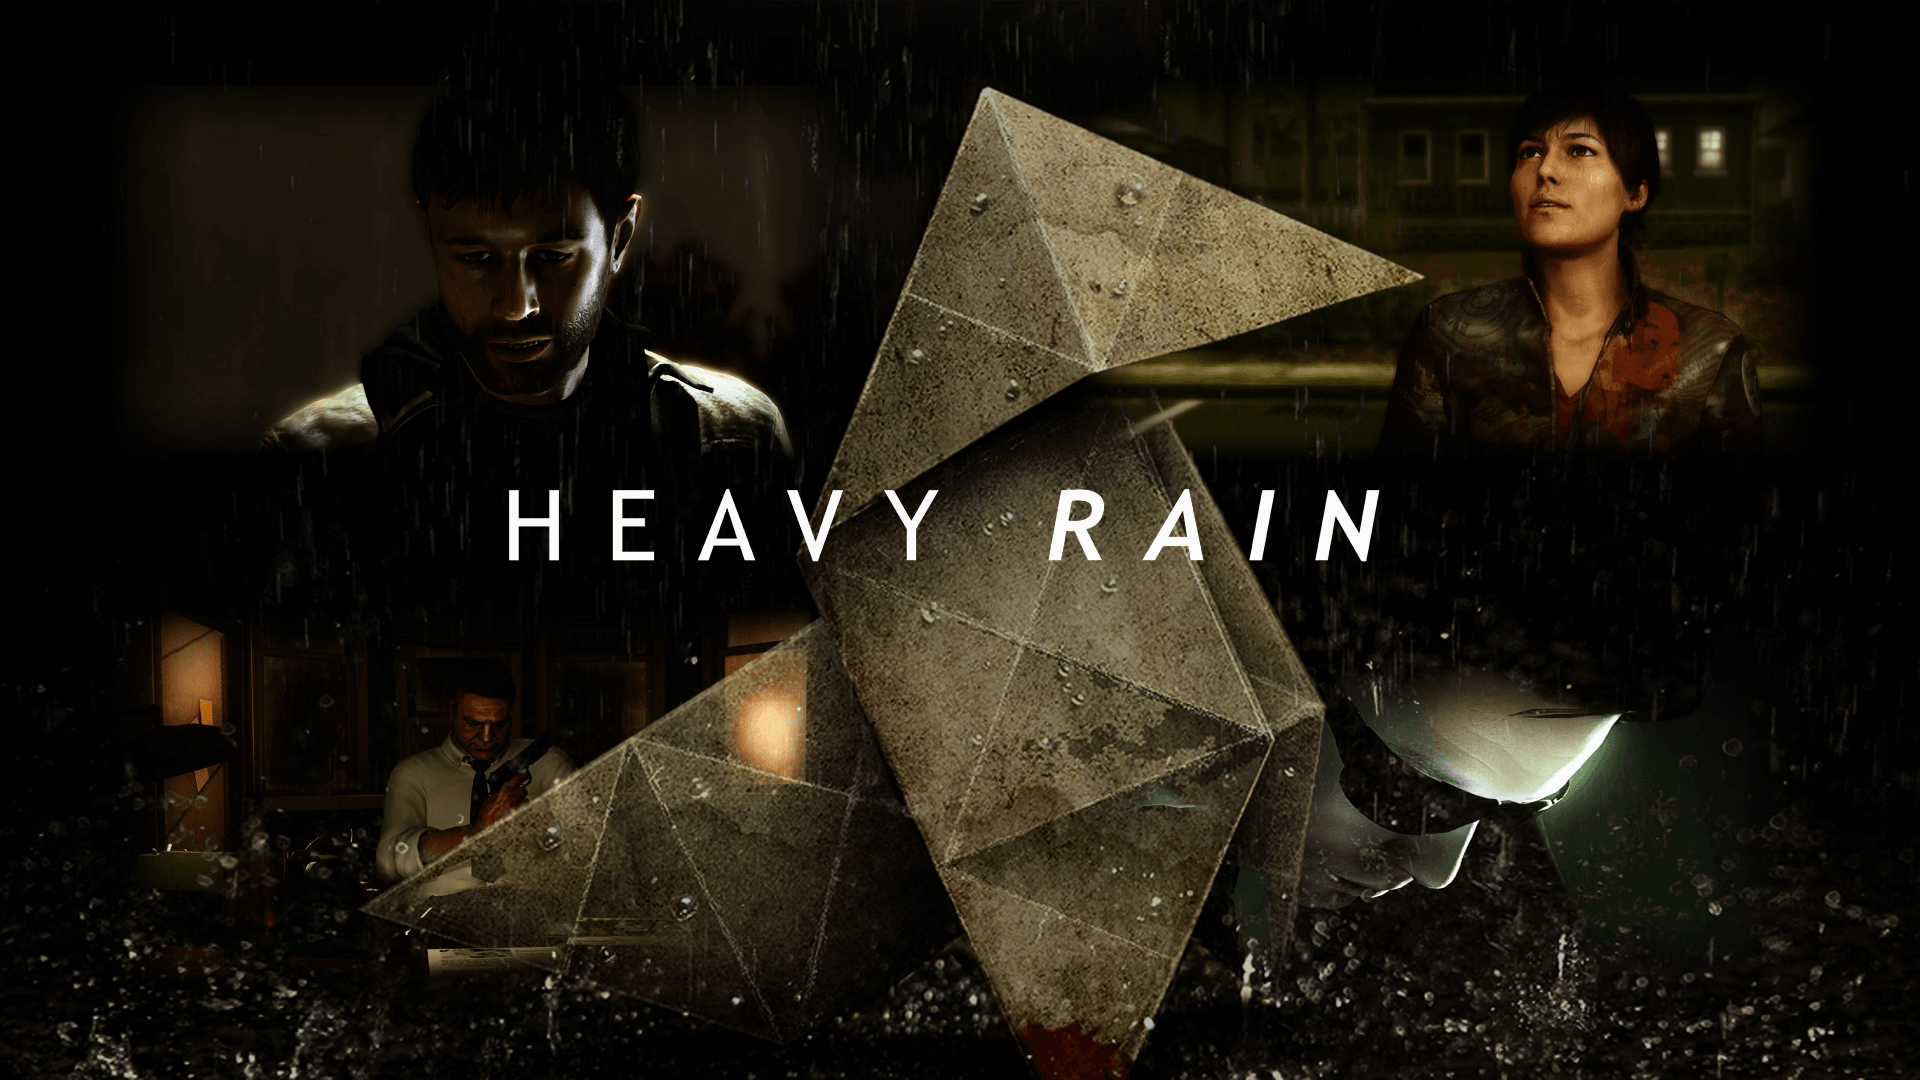 Heavy Rain game PS4 Full Version Free Download